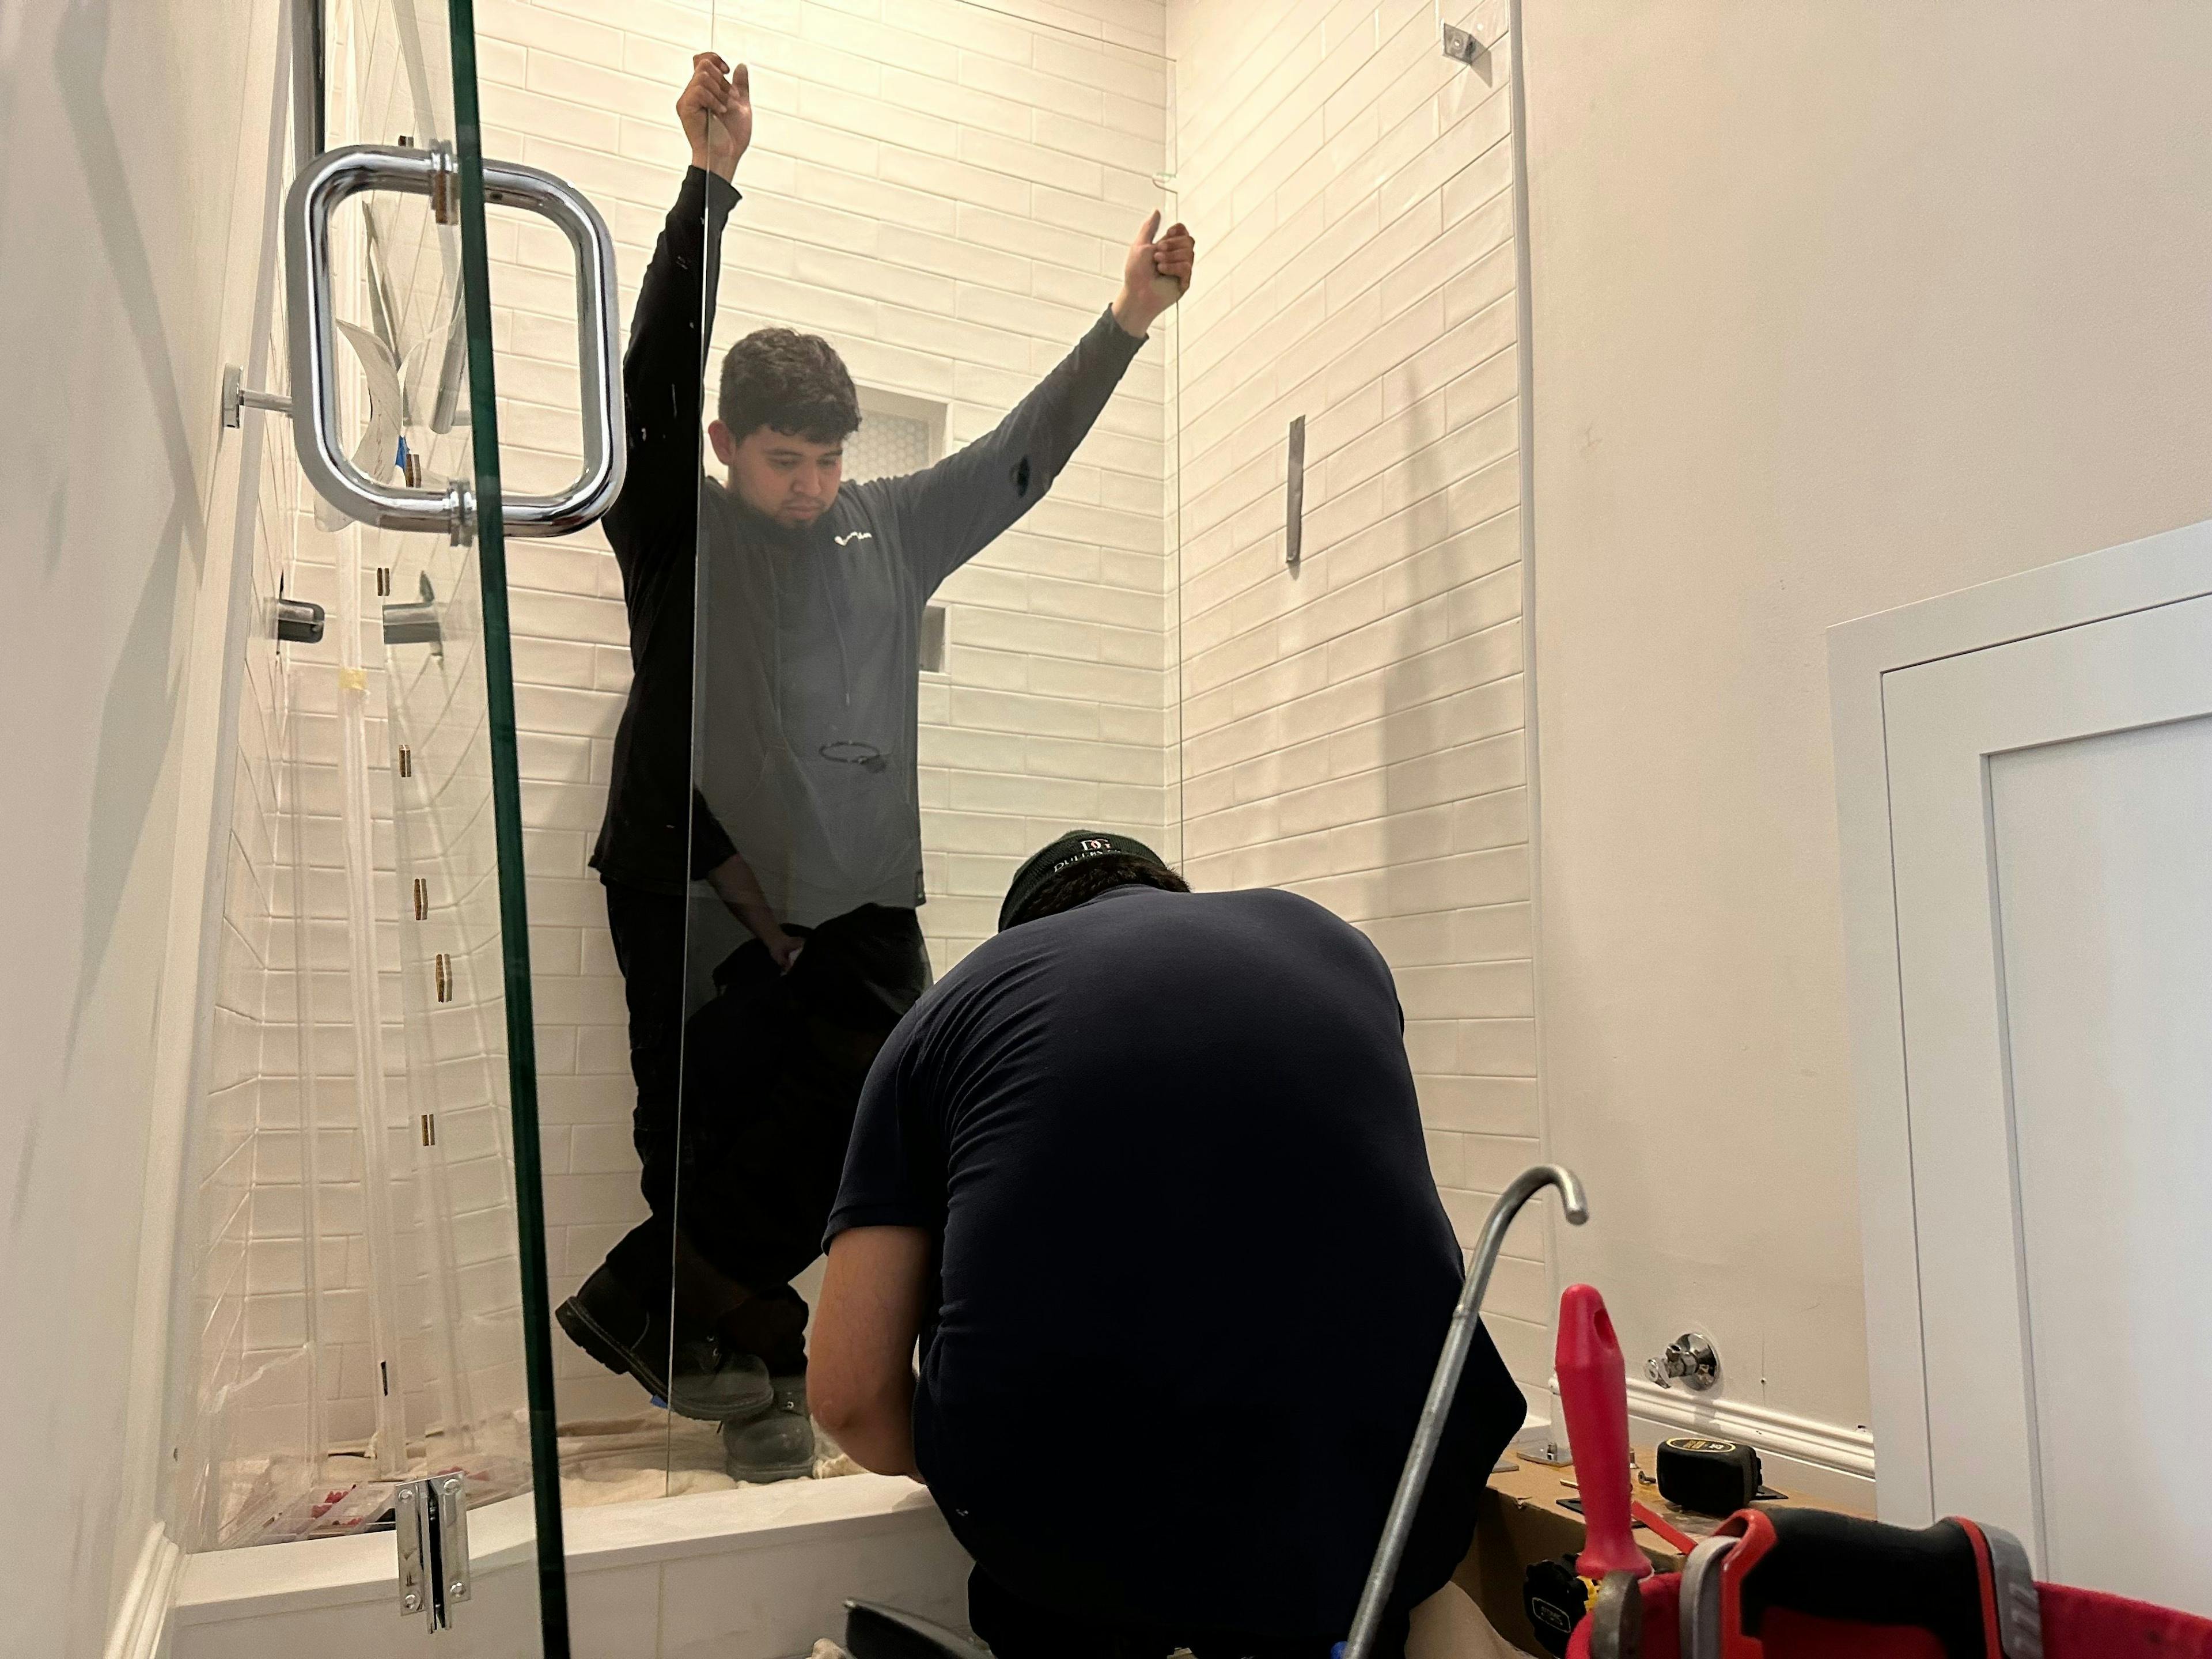 Two Dulles Glass workers, dressed in uniform, expertly installing a glass panel in a stylish white-tiled shower